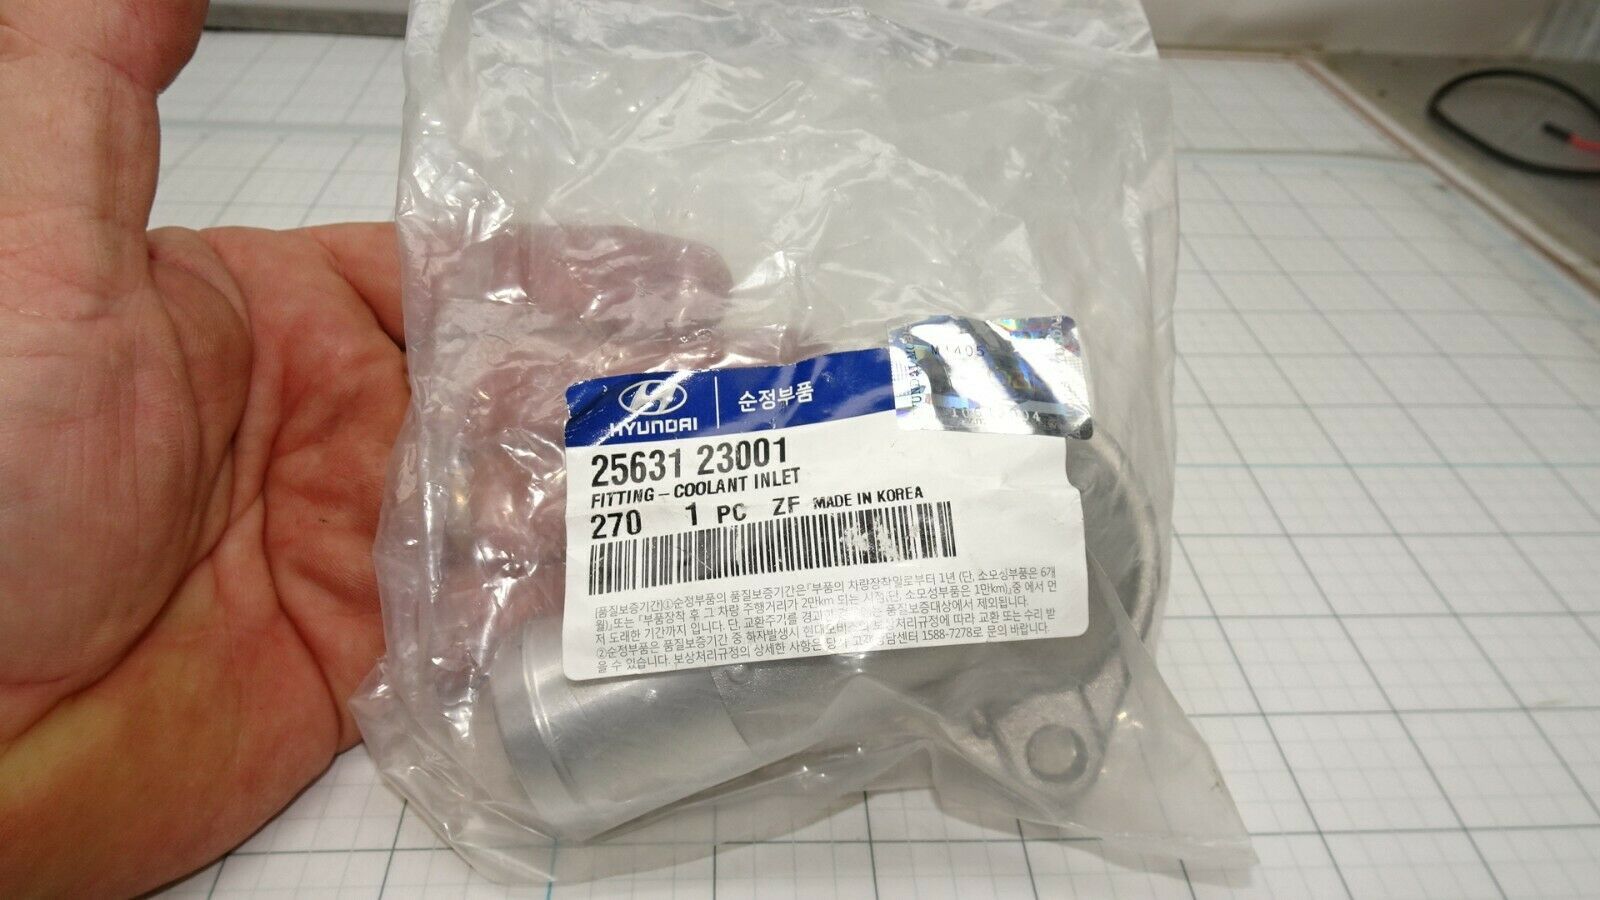 Primary image for Hyundai Kia 25631 23001 Coolant Inlet Thermostat Housing Factory Sealed OEM NOS